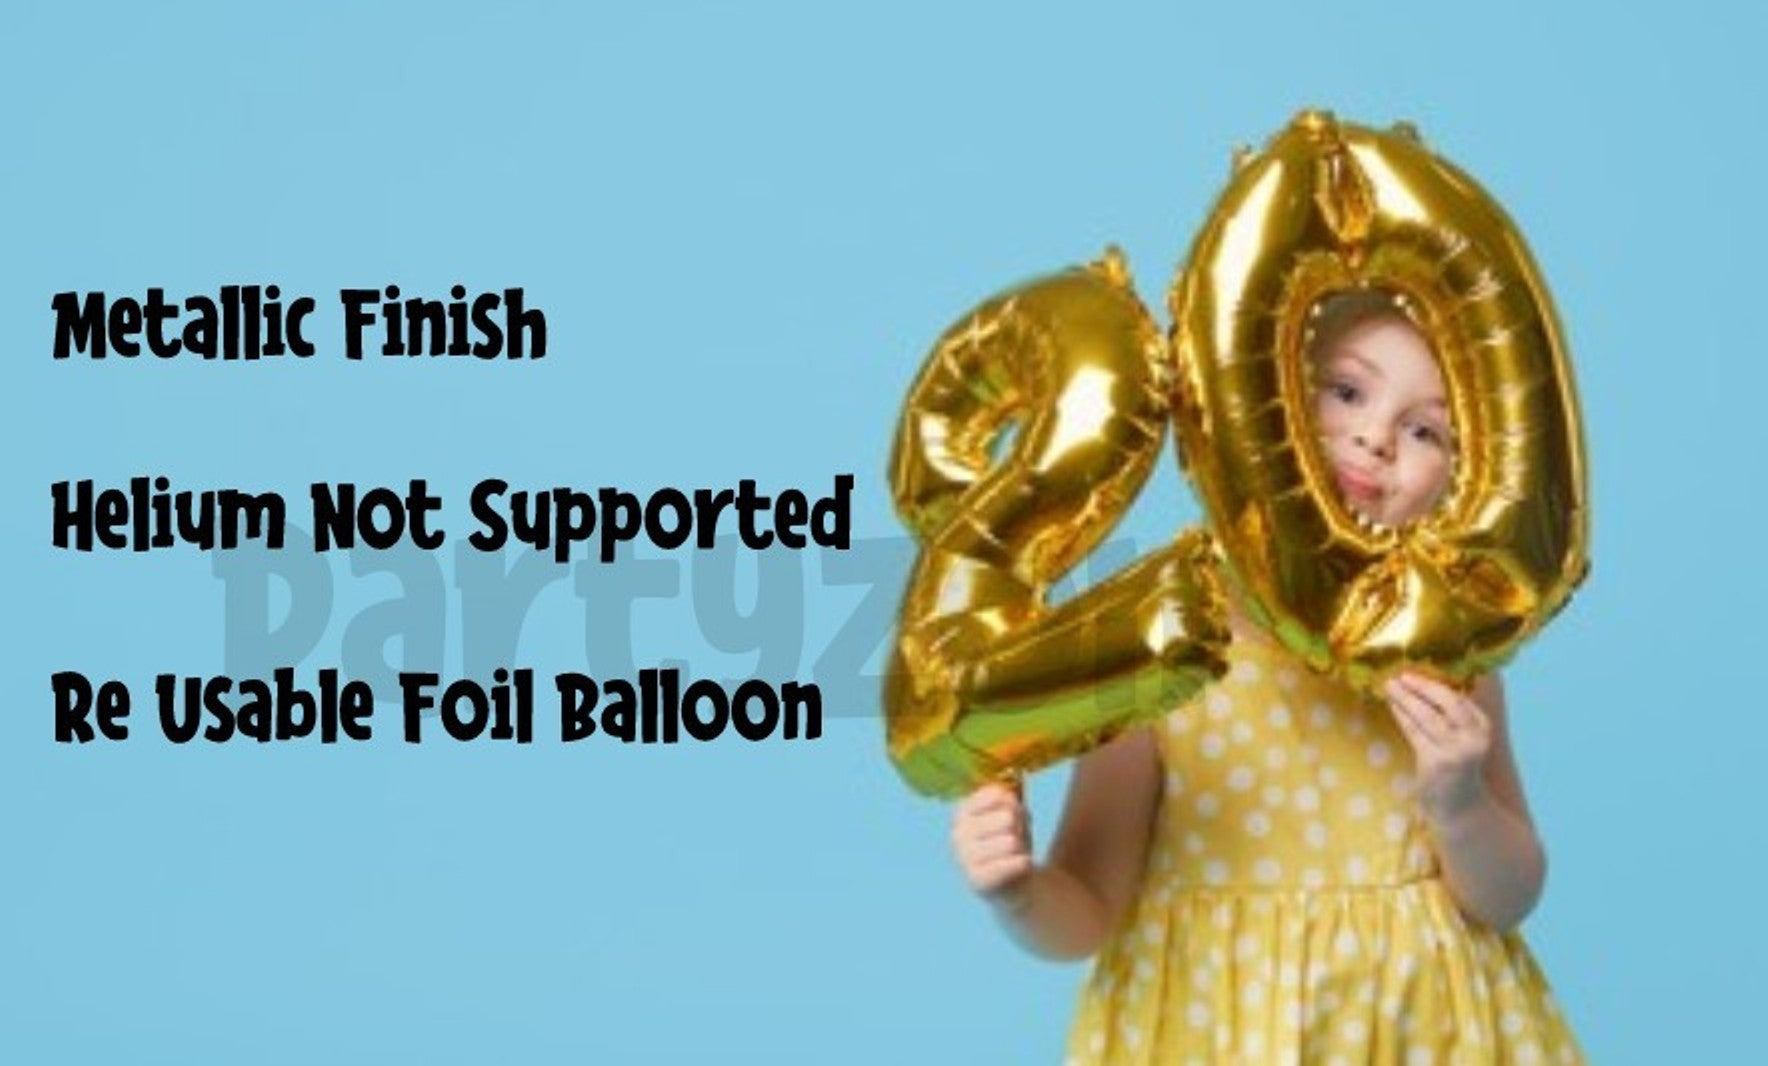 Number 4 Gold Foil Balloon 16 Inches - Balloonistics